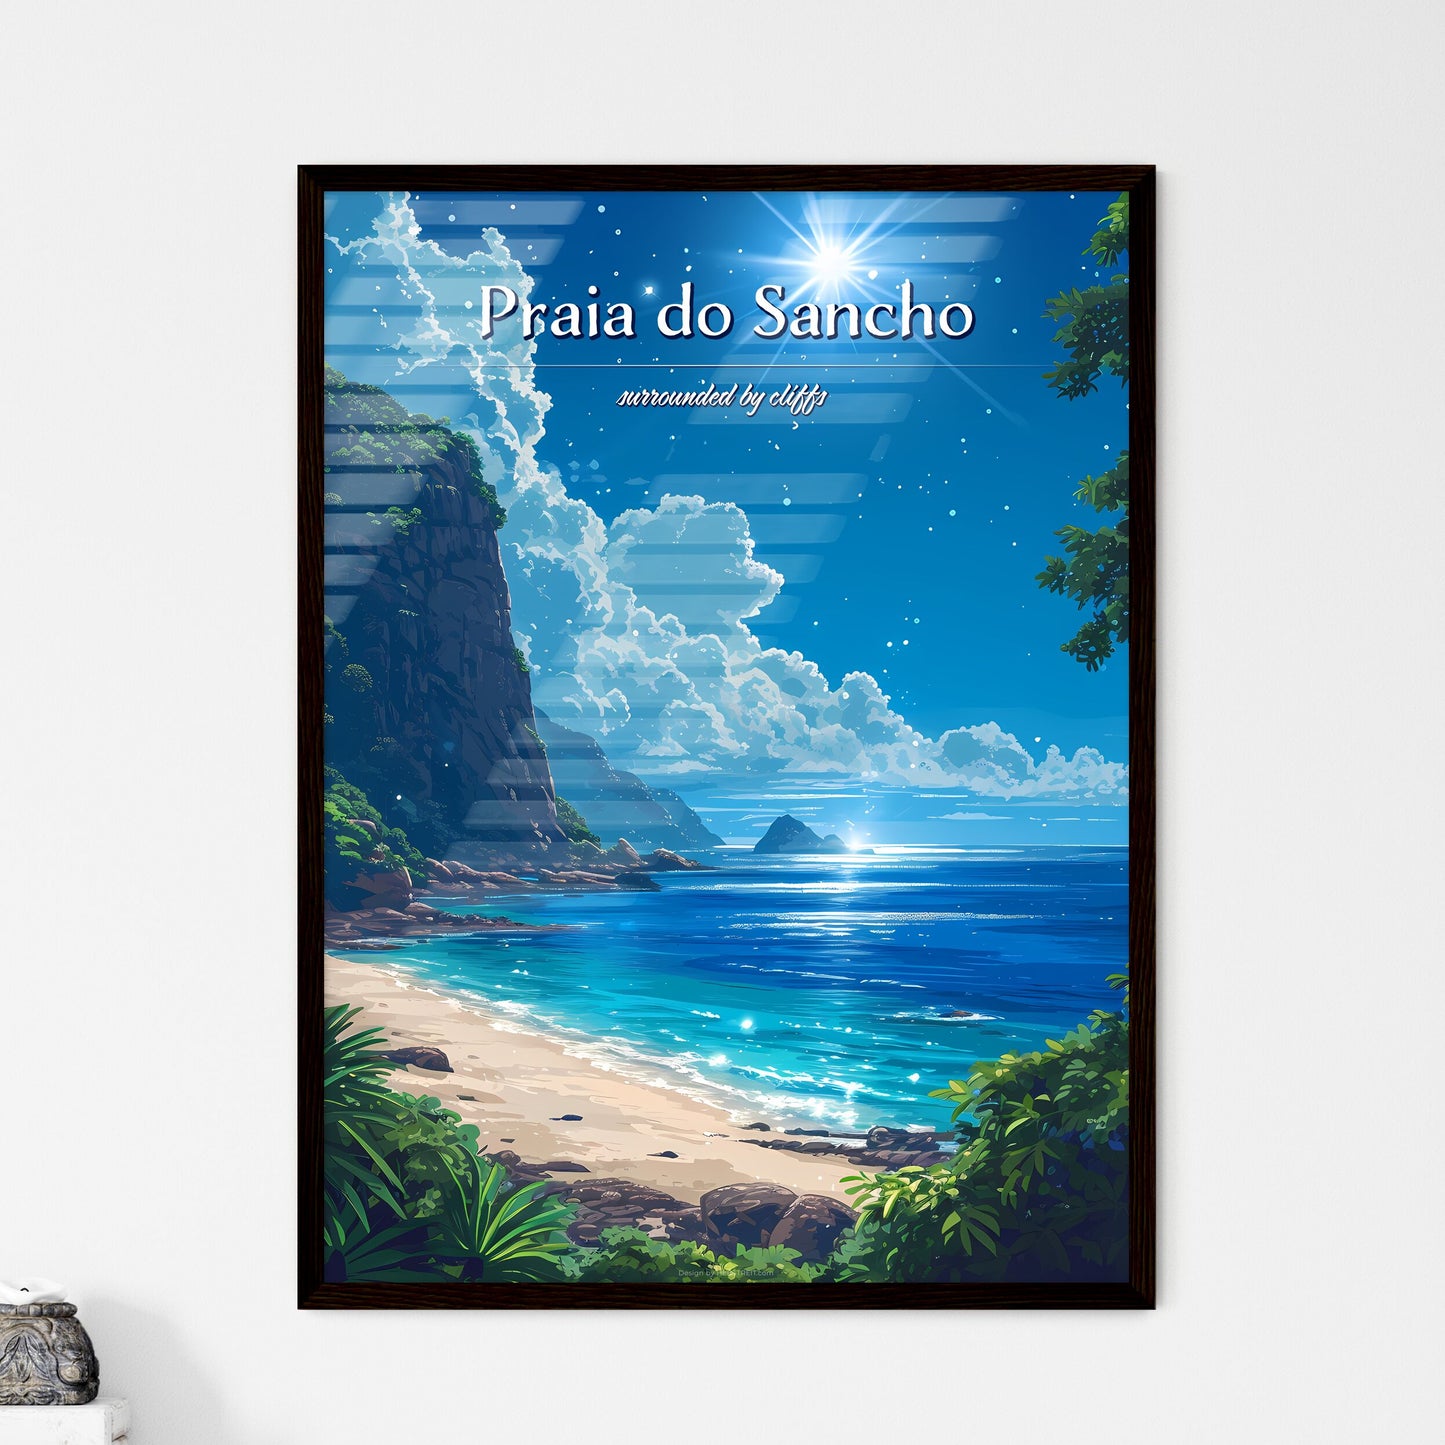 Praia do Sancho Beach - Art print of a couple of cats wearing hoodies and sunglasses Default Title